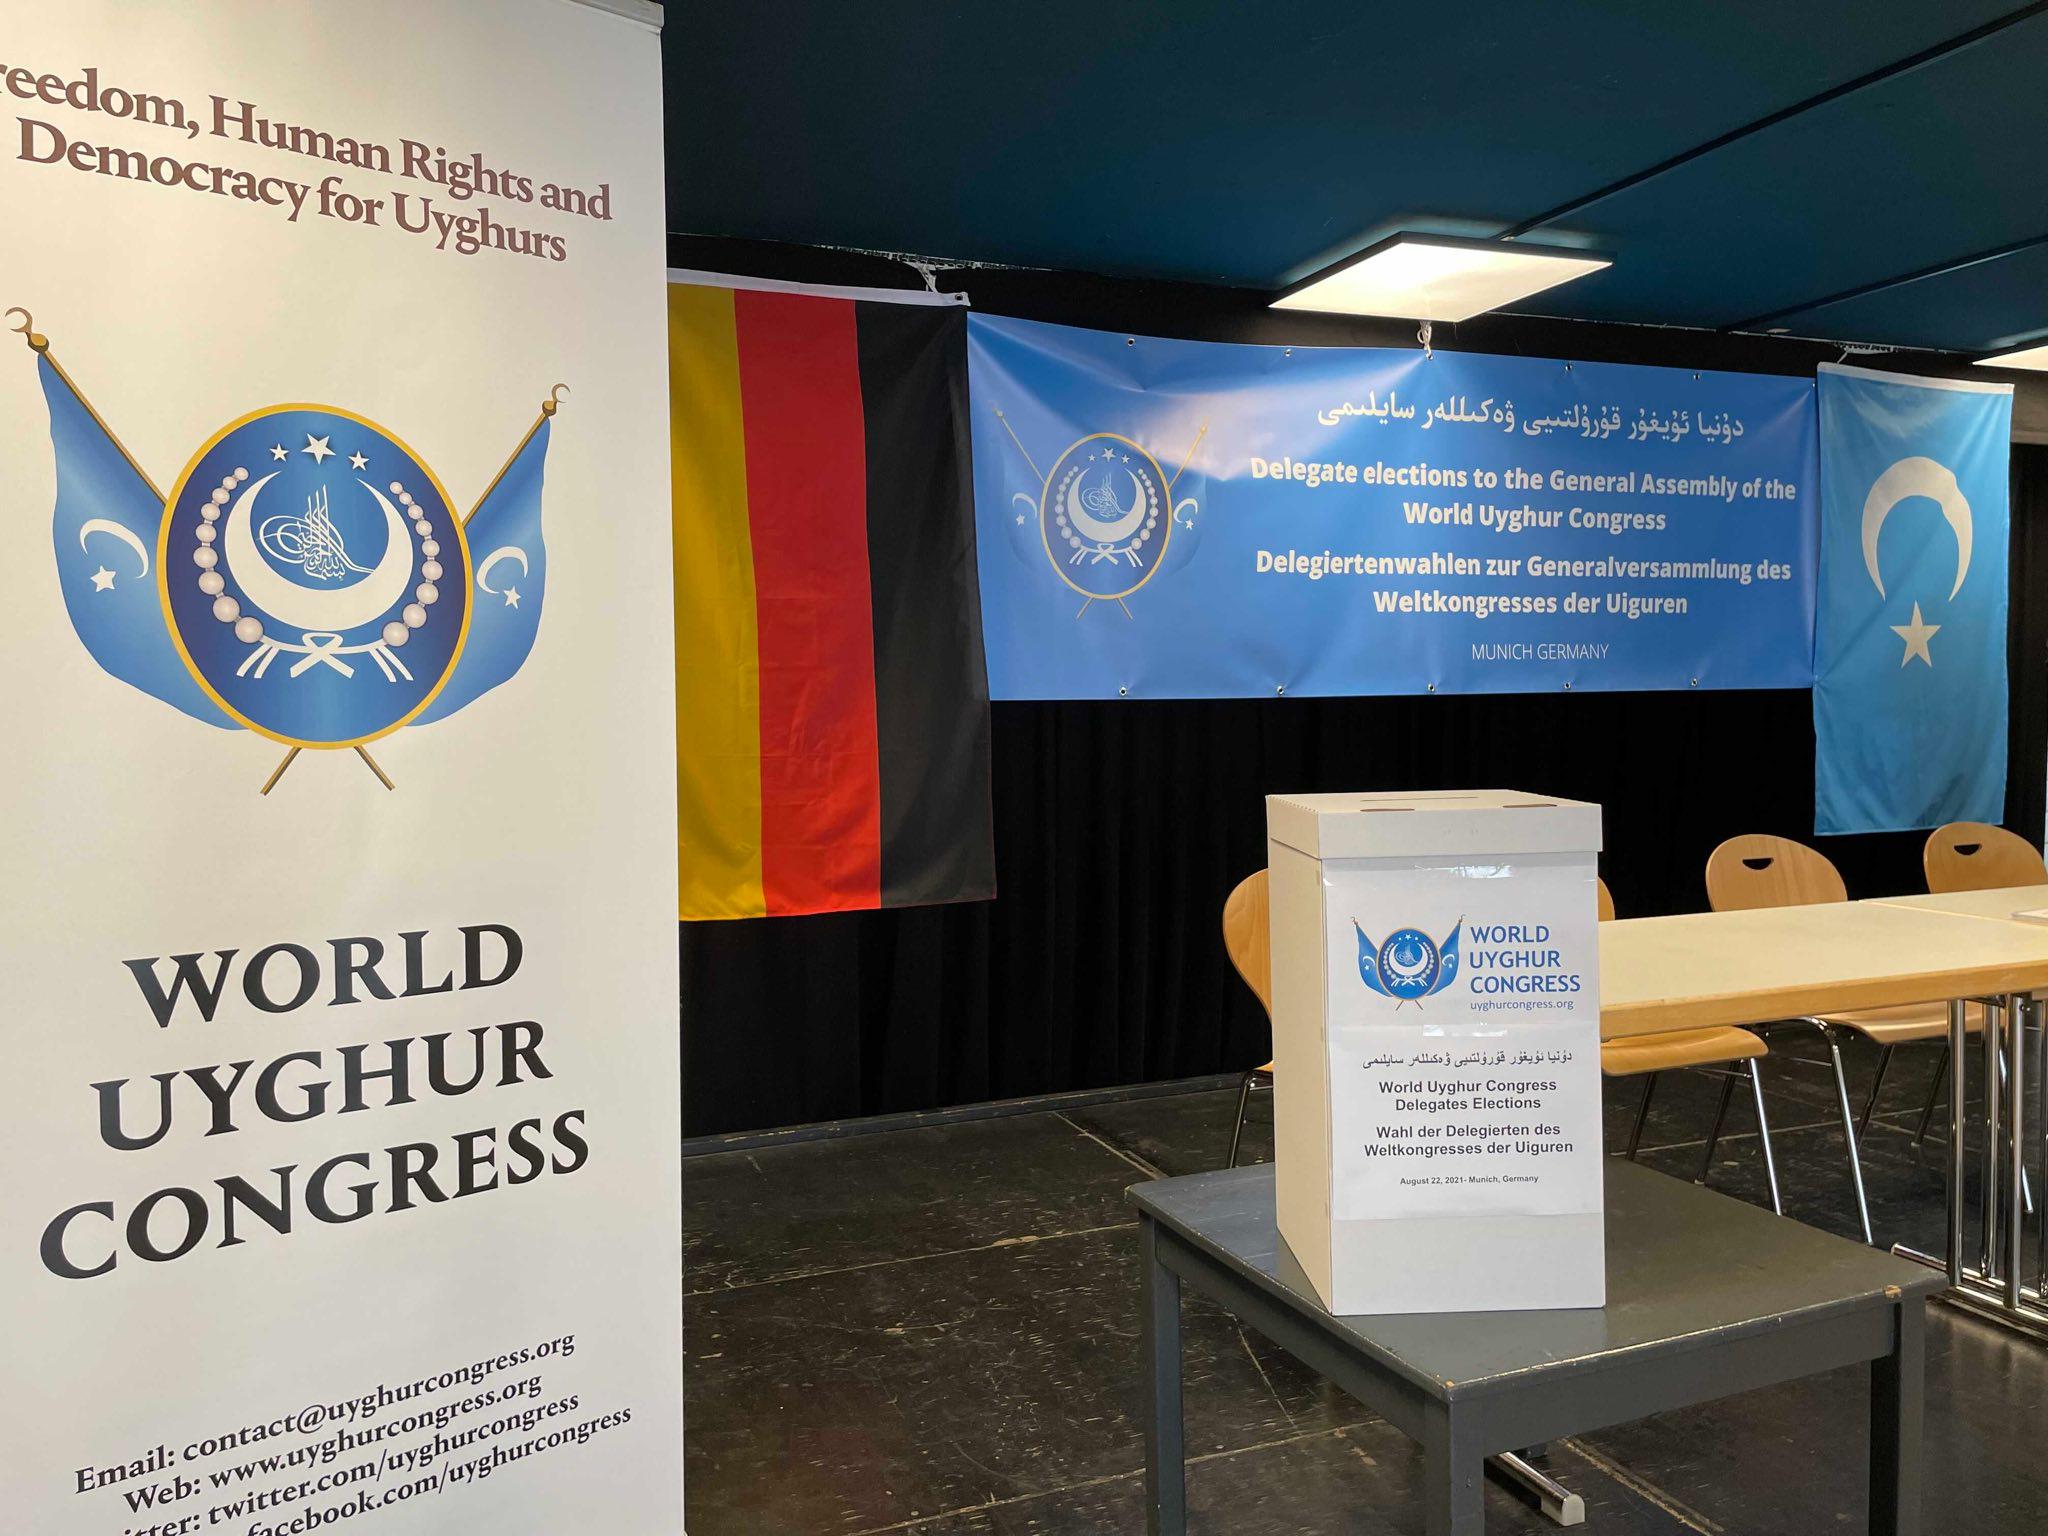 PRESS RELEASE: WORLD UYGHUR CONGRESS TO CONVENE ITS 7TH GENERAL ASSEMBLY